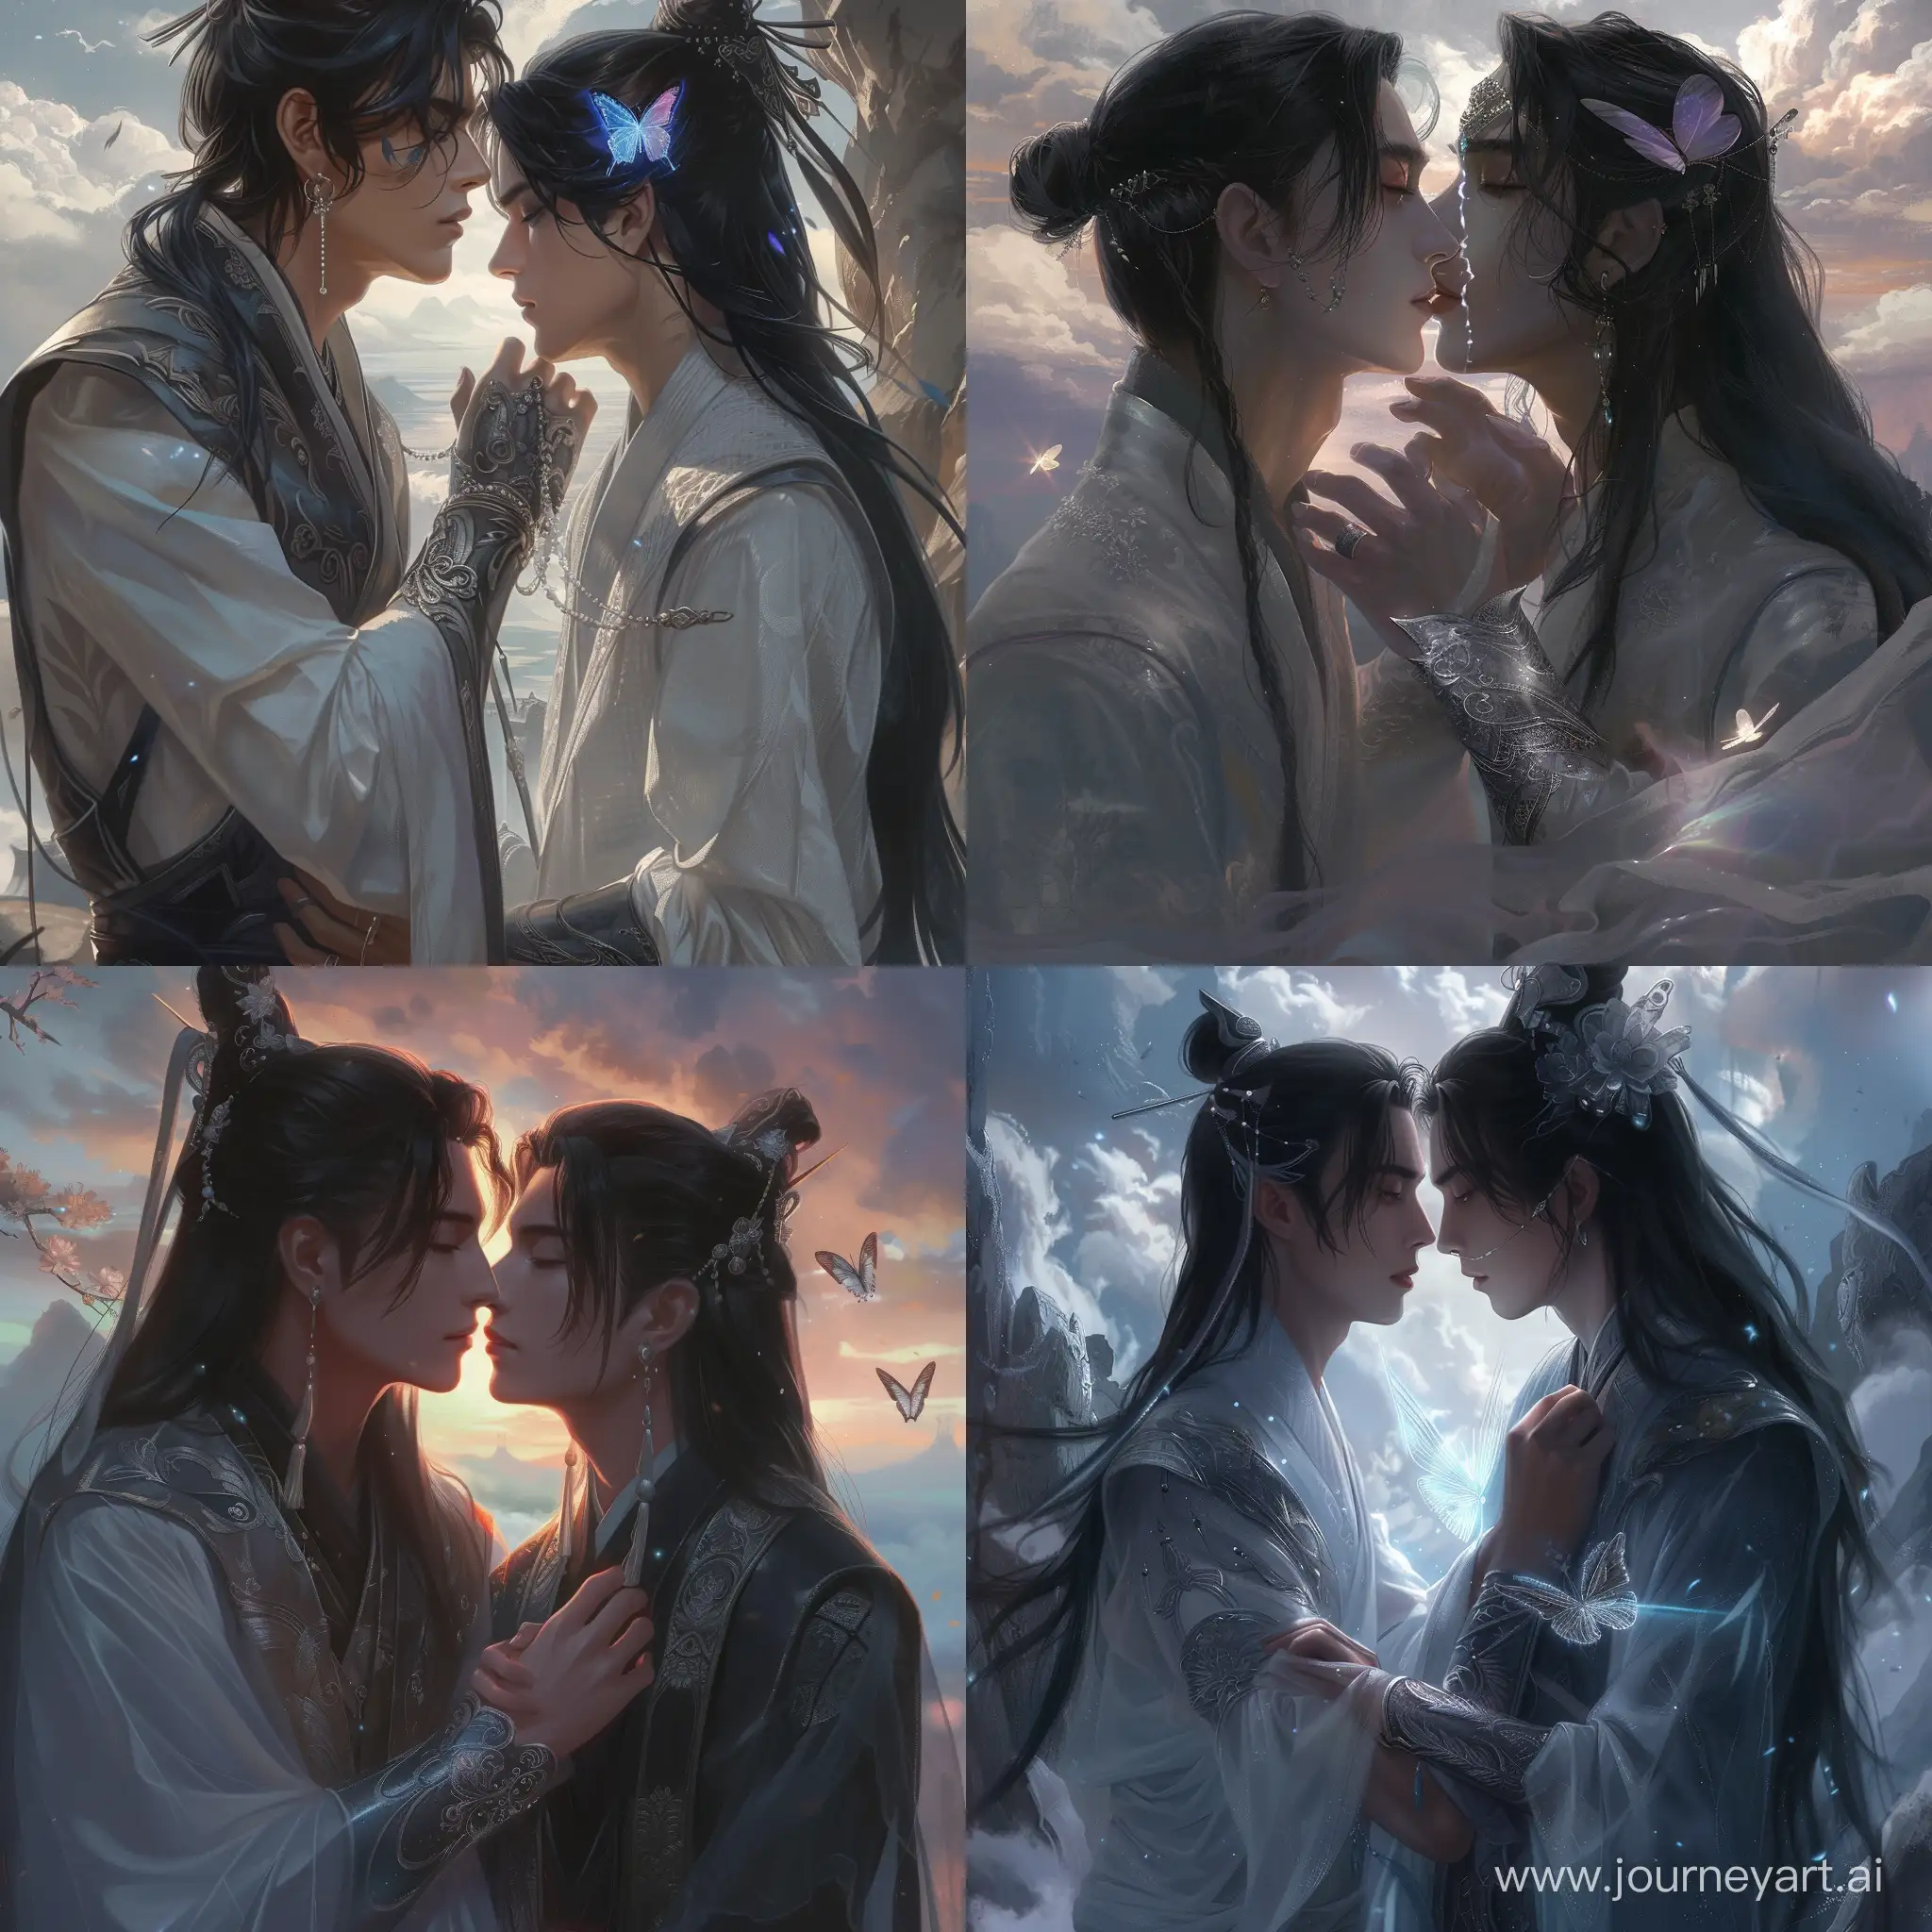 butterfly jewlery, two men almost kissing, danmei artstyle, semi realistic art, beautiful scenary cloud architecture, asian fantasy background, clothing robe fantasy, magical glow, delicate vambraces, silver jewel, long luxurious black hair, perspective, source of light, detailed